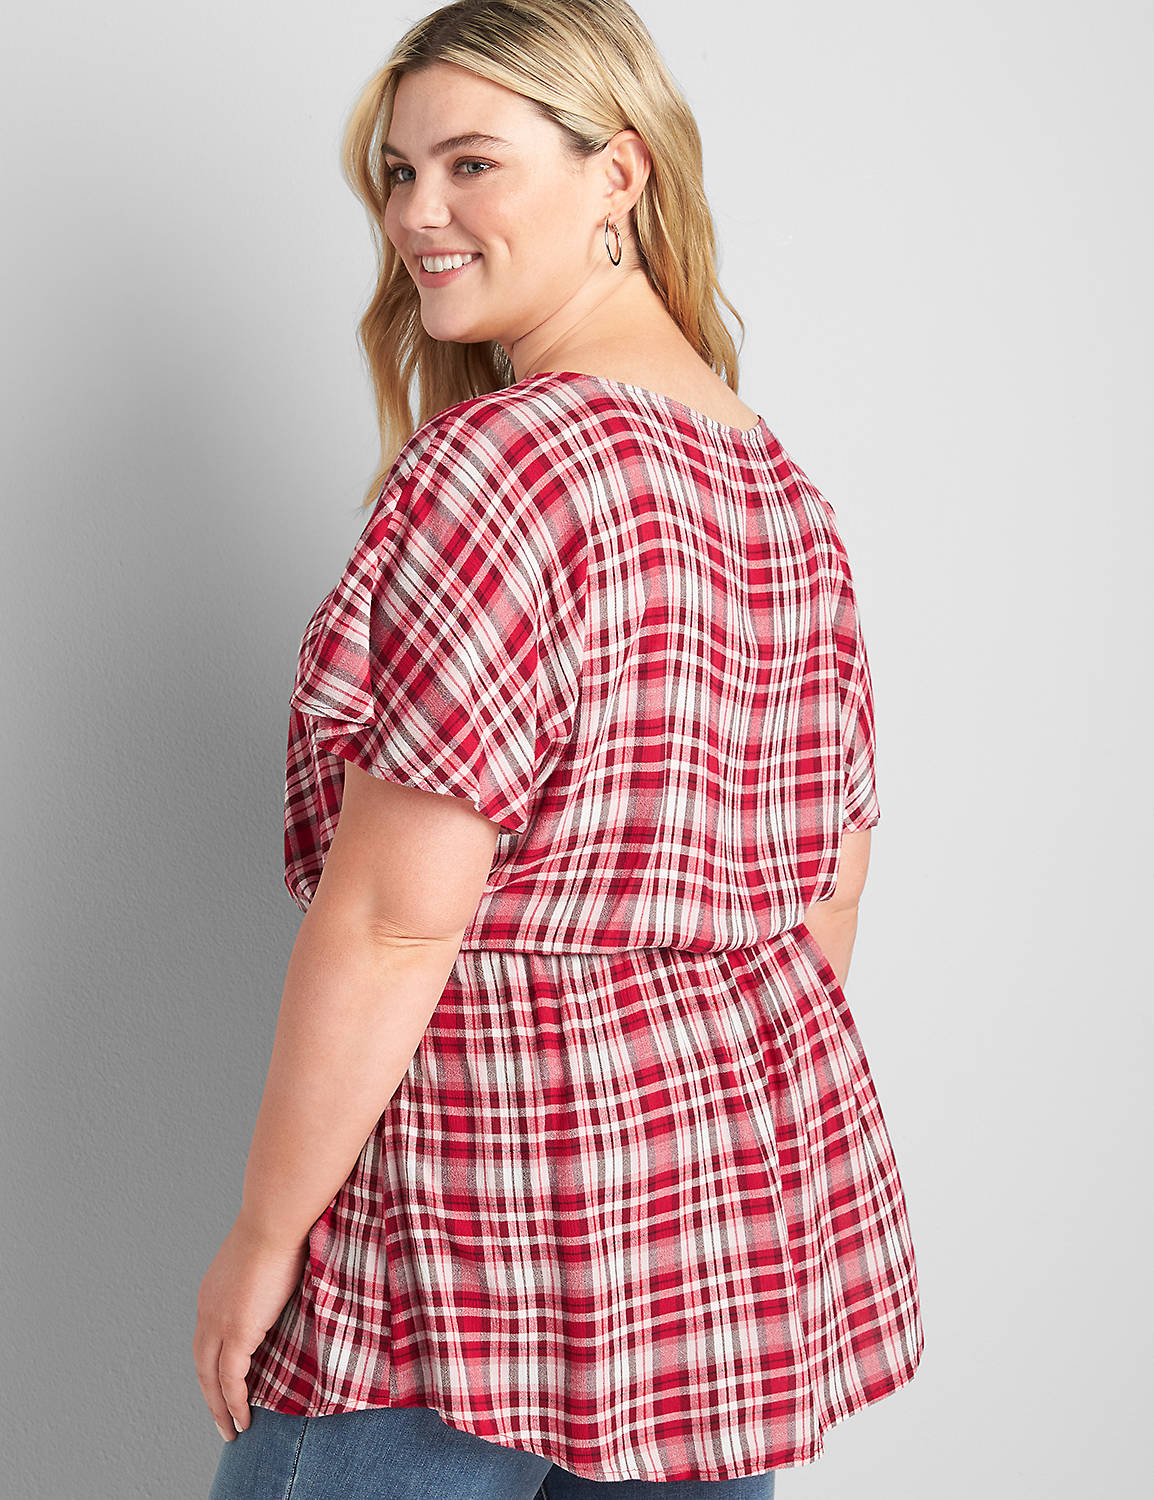 Short-Sleeve Belted Plaid Top Product Image 2